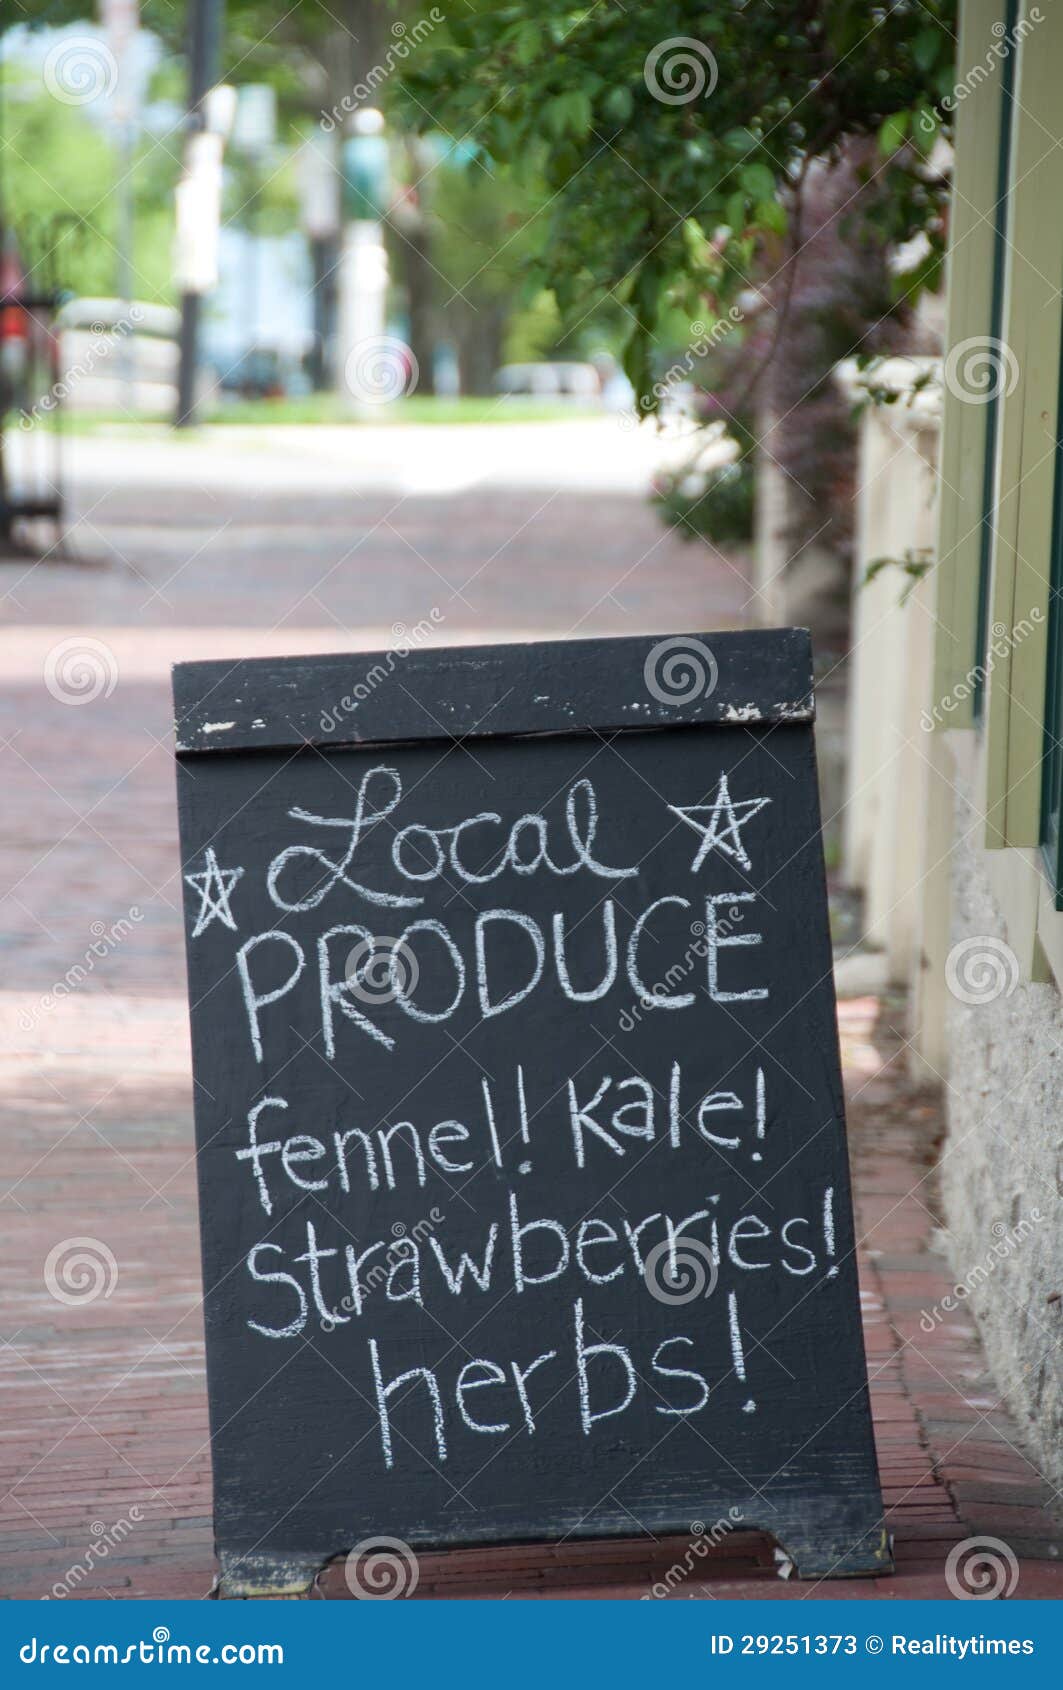 local produce: fennel, kale, strawberries & herbs